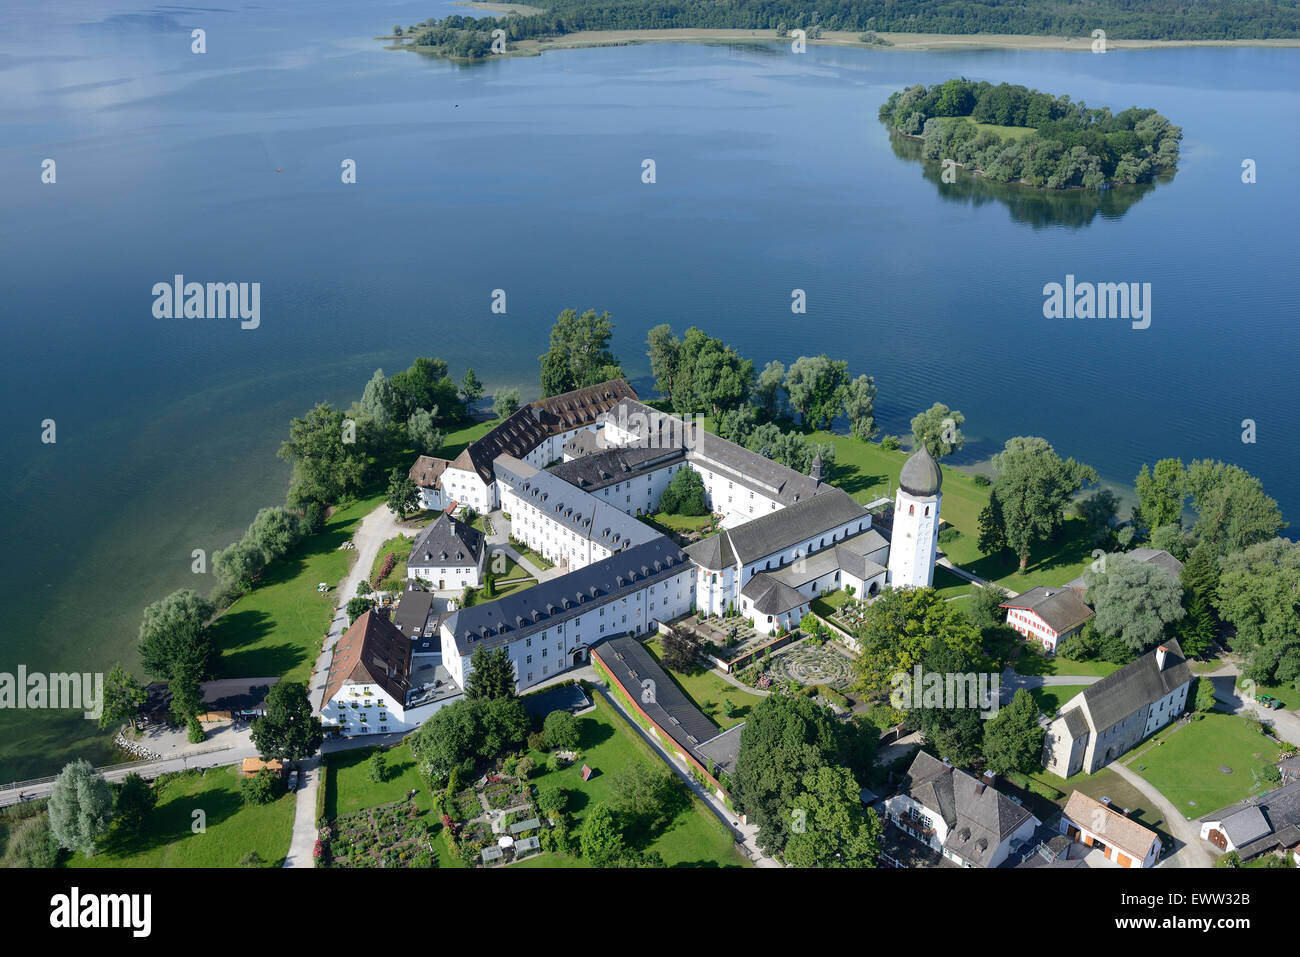 AERIAL VIEW. Benedictine Abbey of Frauenwörth on Frauenchiemsee (also known as Fraueninsel) island. Lake Chiemsee, Bavaria, Germany. Stock Photo